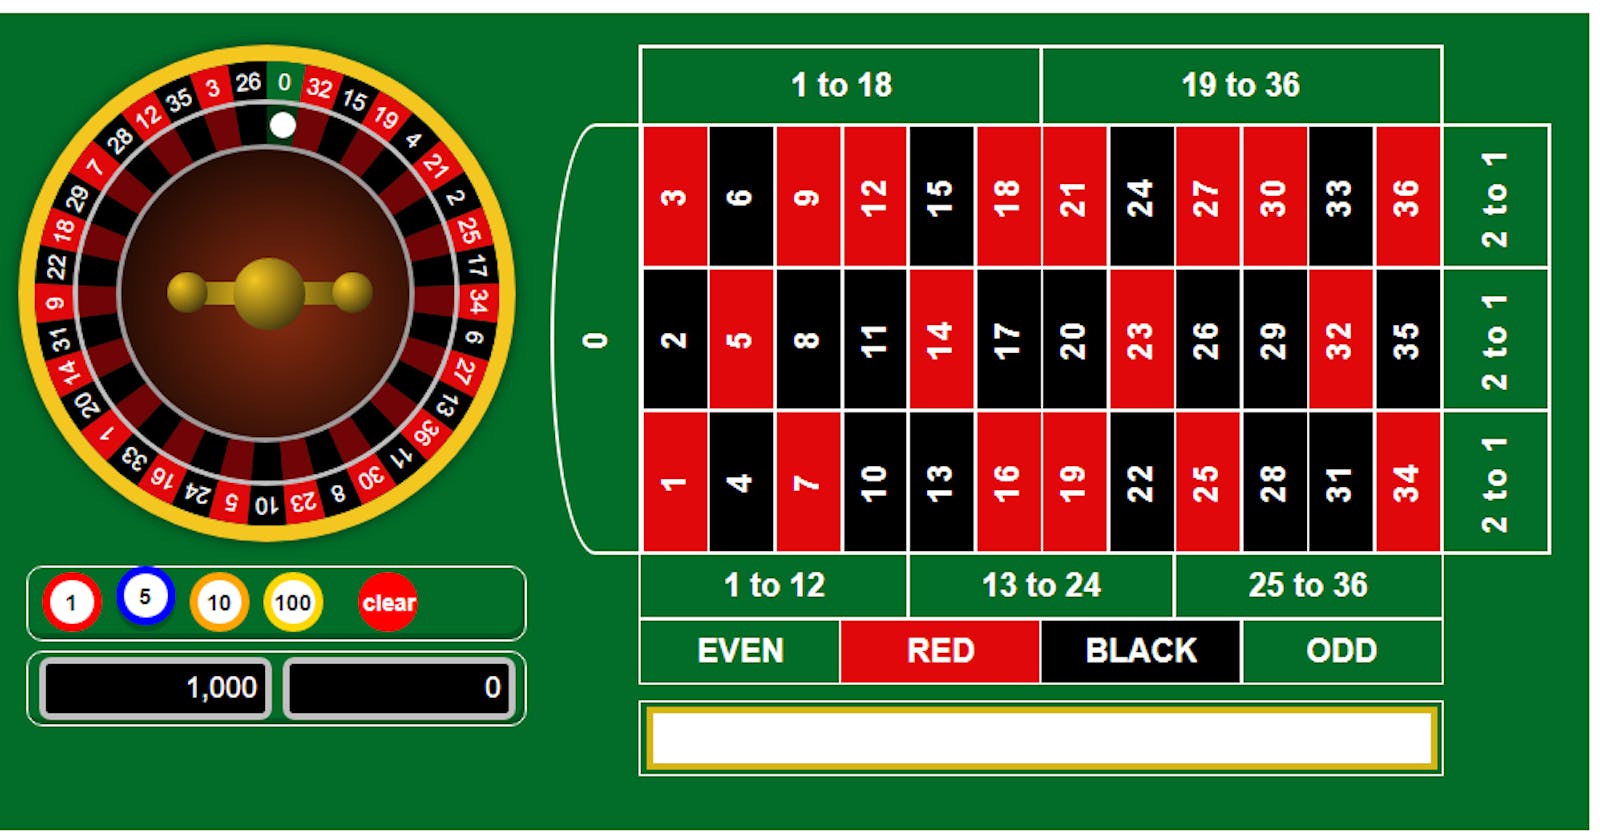 One way to make Roulette using Javascript - Part 1